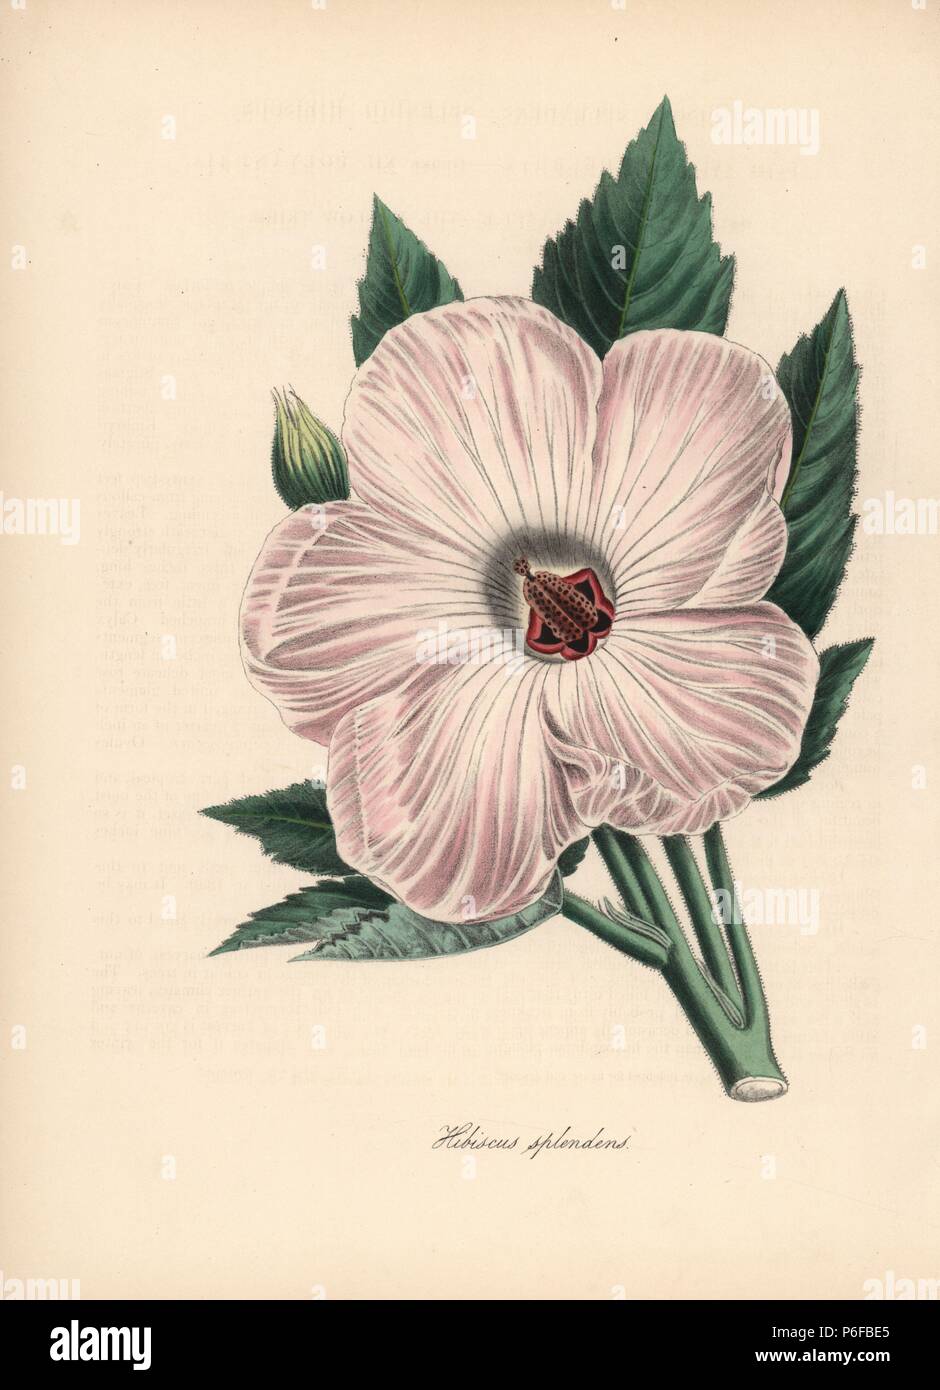 Splendid hibiscus, Hibiscus spendens. Handcoloured zincograph by C. Chabot drawn by Miss M. A. Burnett from her 'Plantae Utiliores: or Illustrations of Useful Plants,' Whittaker, London, 1842. Miss Burnett drew the botanical illustrations, but the text was chiefly by her late brother, British botanist Gilbert Thomas Burnett (1800-1835). Stock Photo